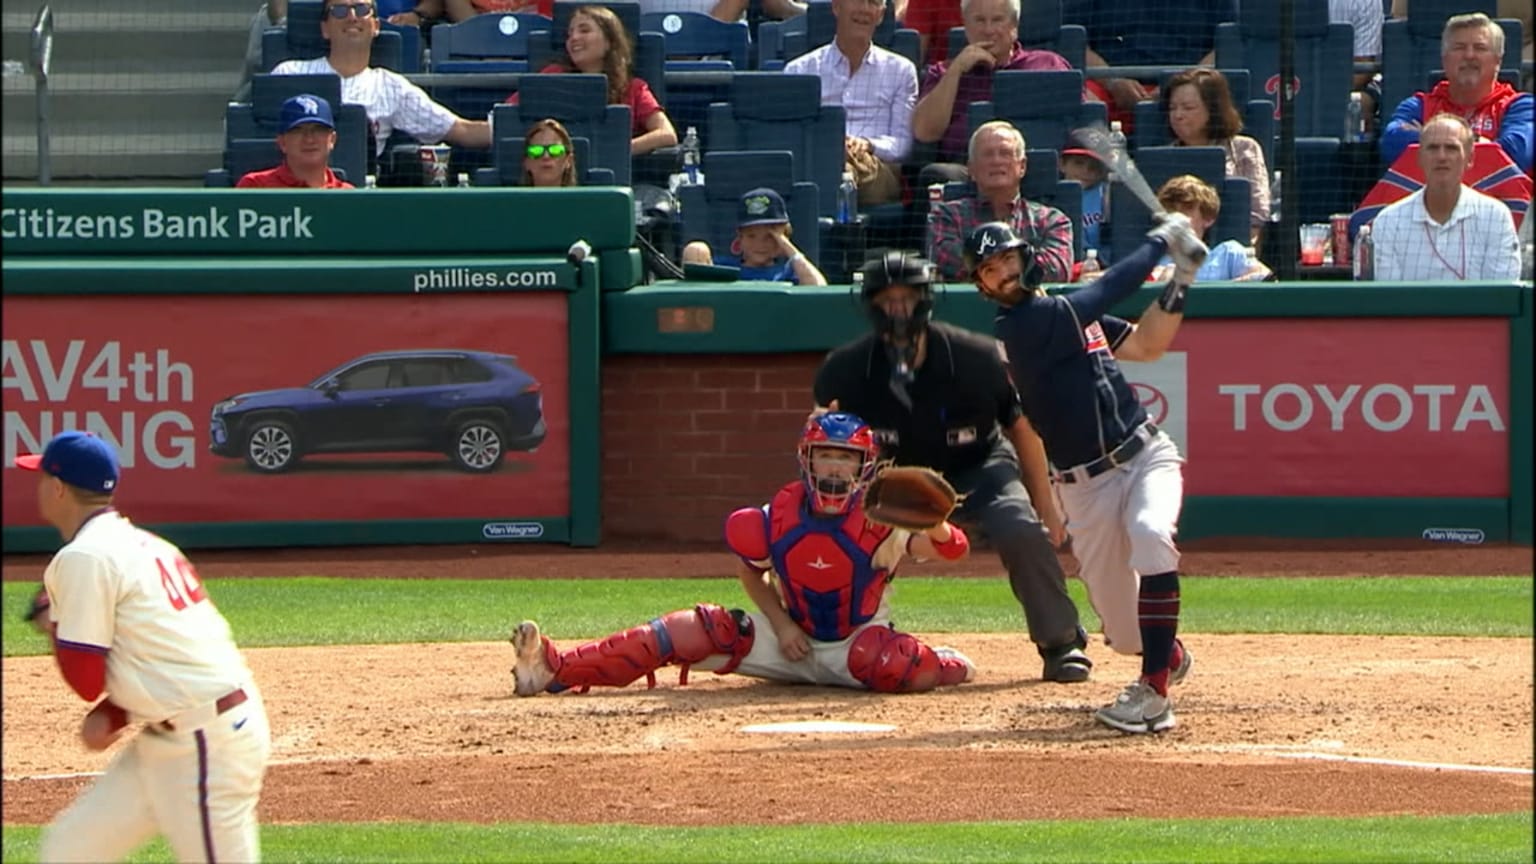 Be mesmerized by the majesty with which Dansby Swanson fielded this  grounder